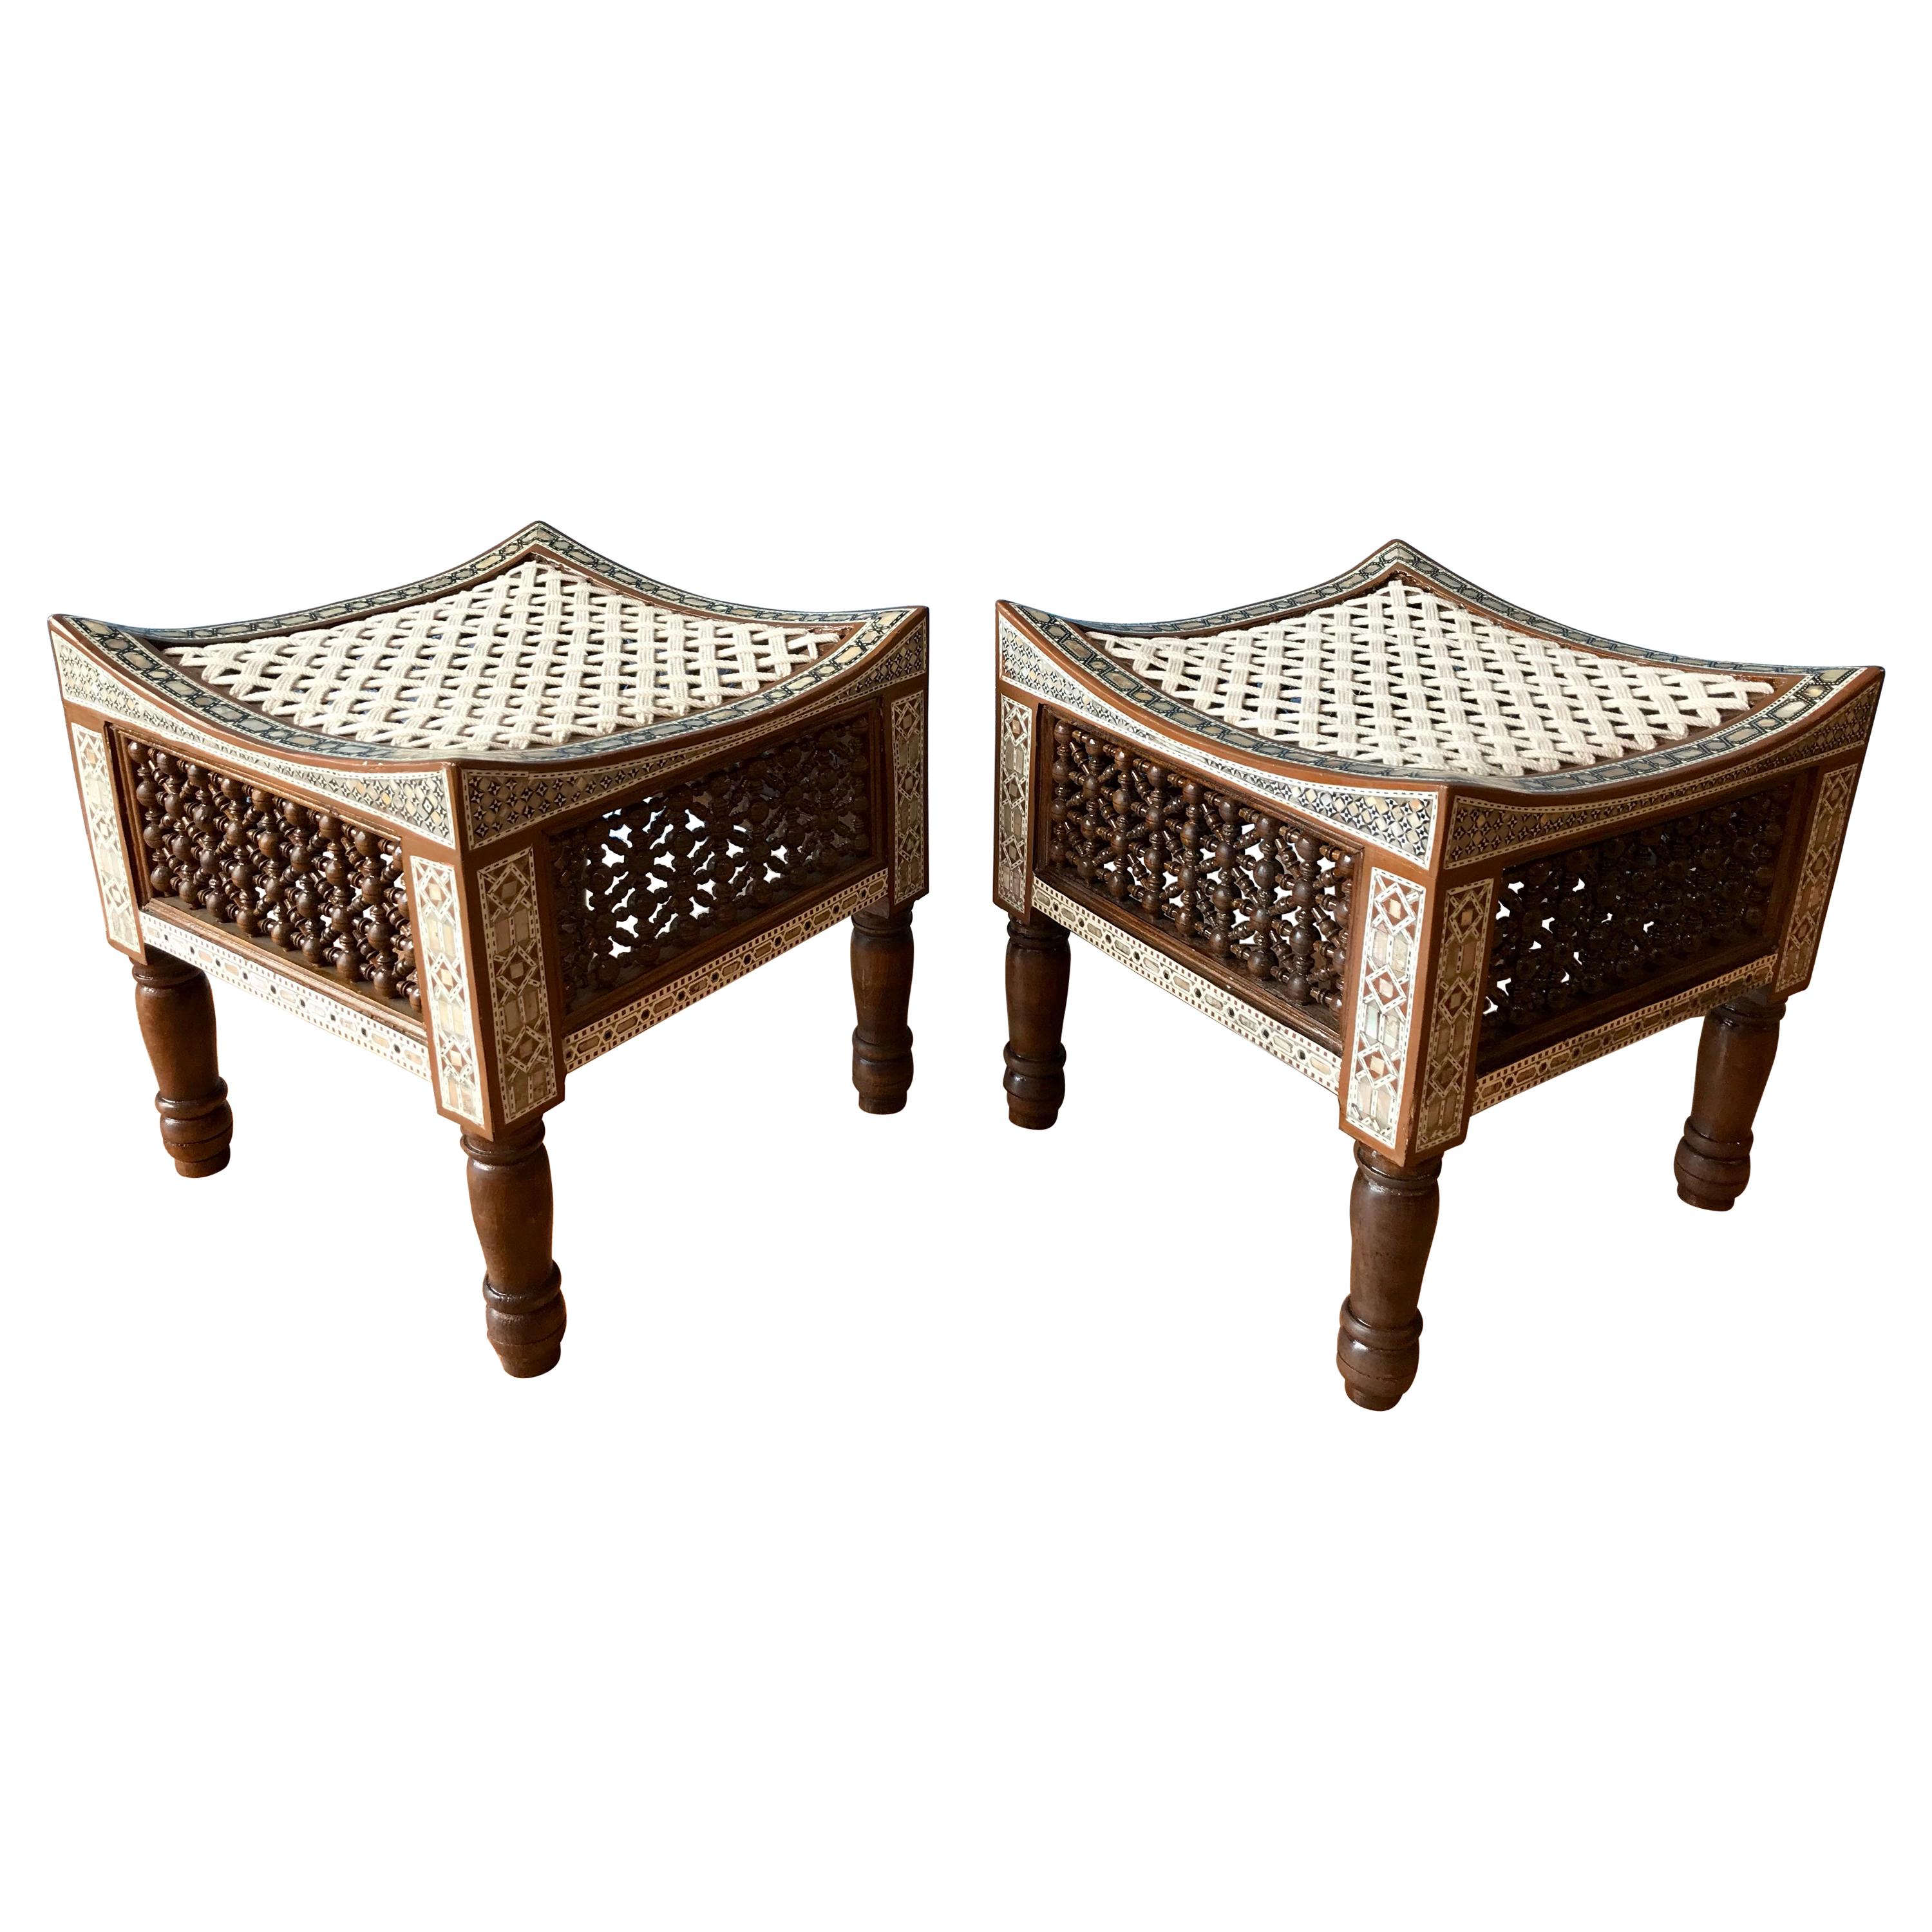 Pair of Moroccan Stools